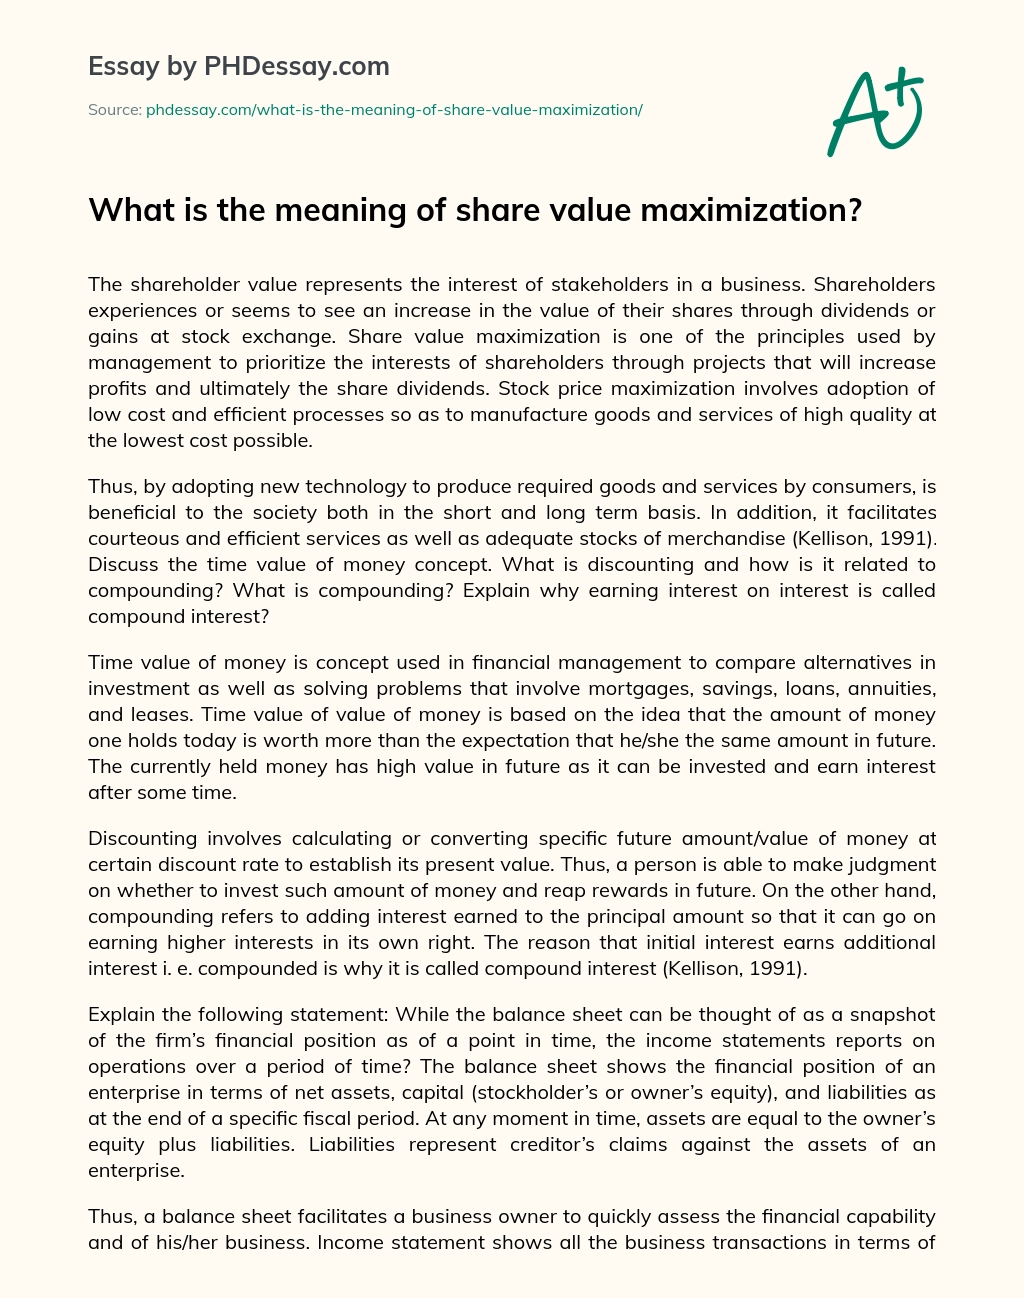 What is the meaning of share value maximization? essay